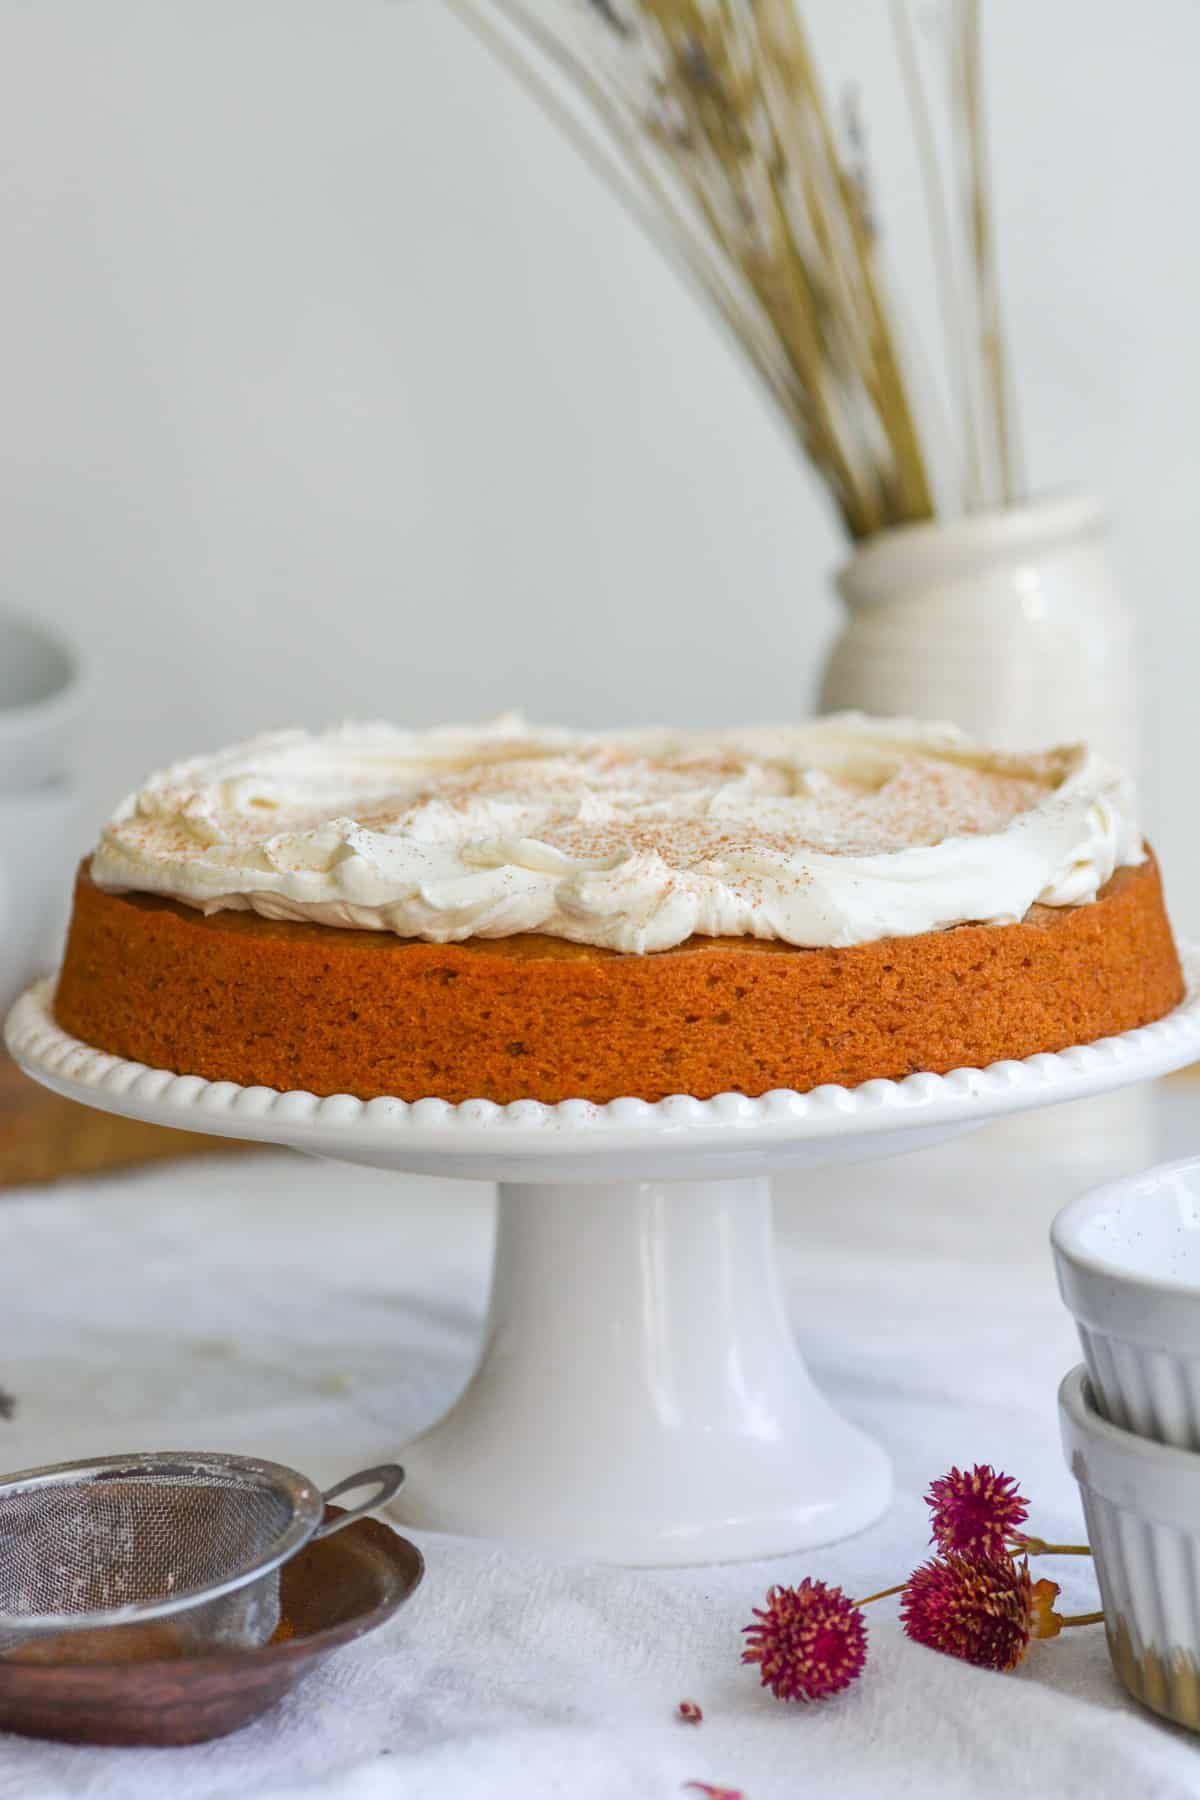 The frosted Vegan Maple Sweet Potato Cake on a white cake stand.